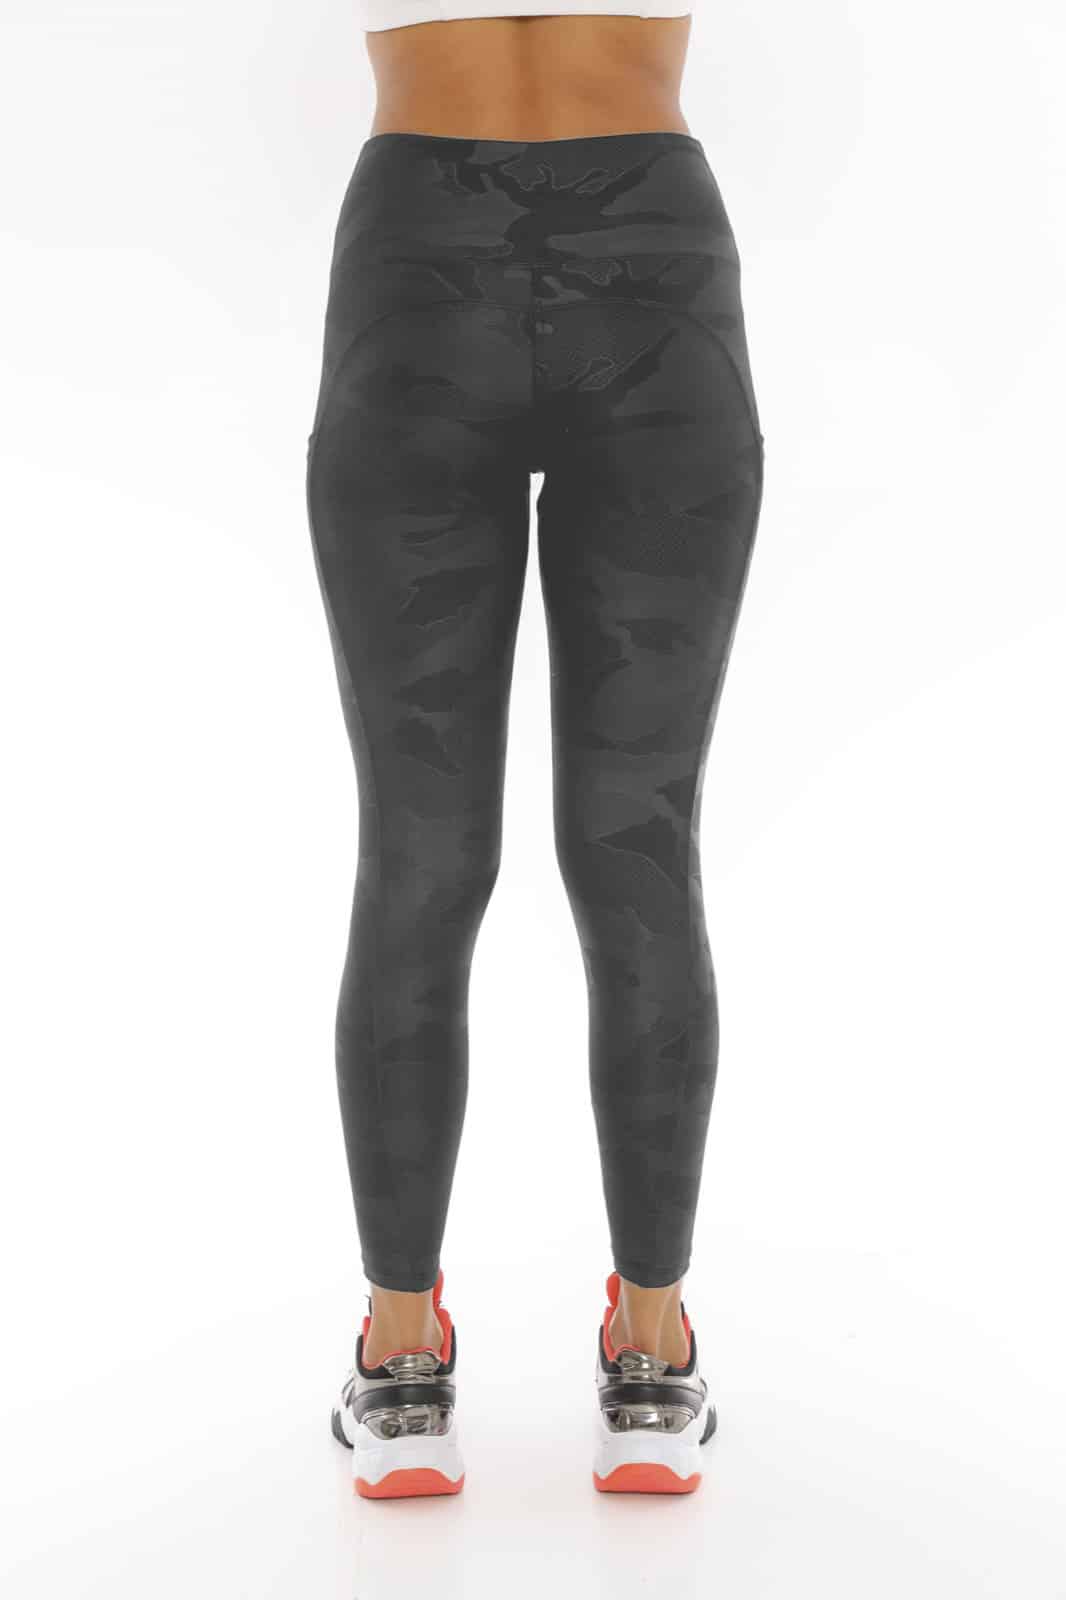 SEEMLY High Waisted Leggings with Pockets for Tummy Nepal